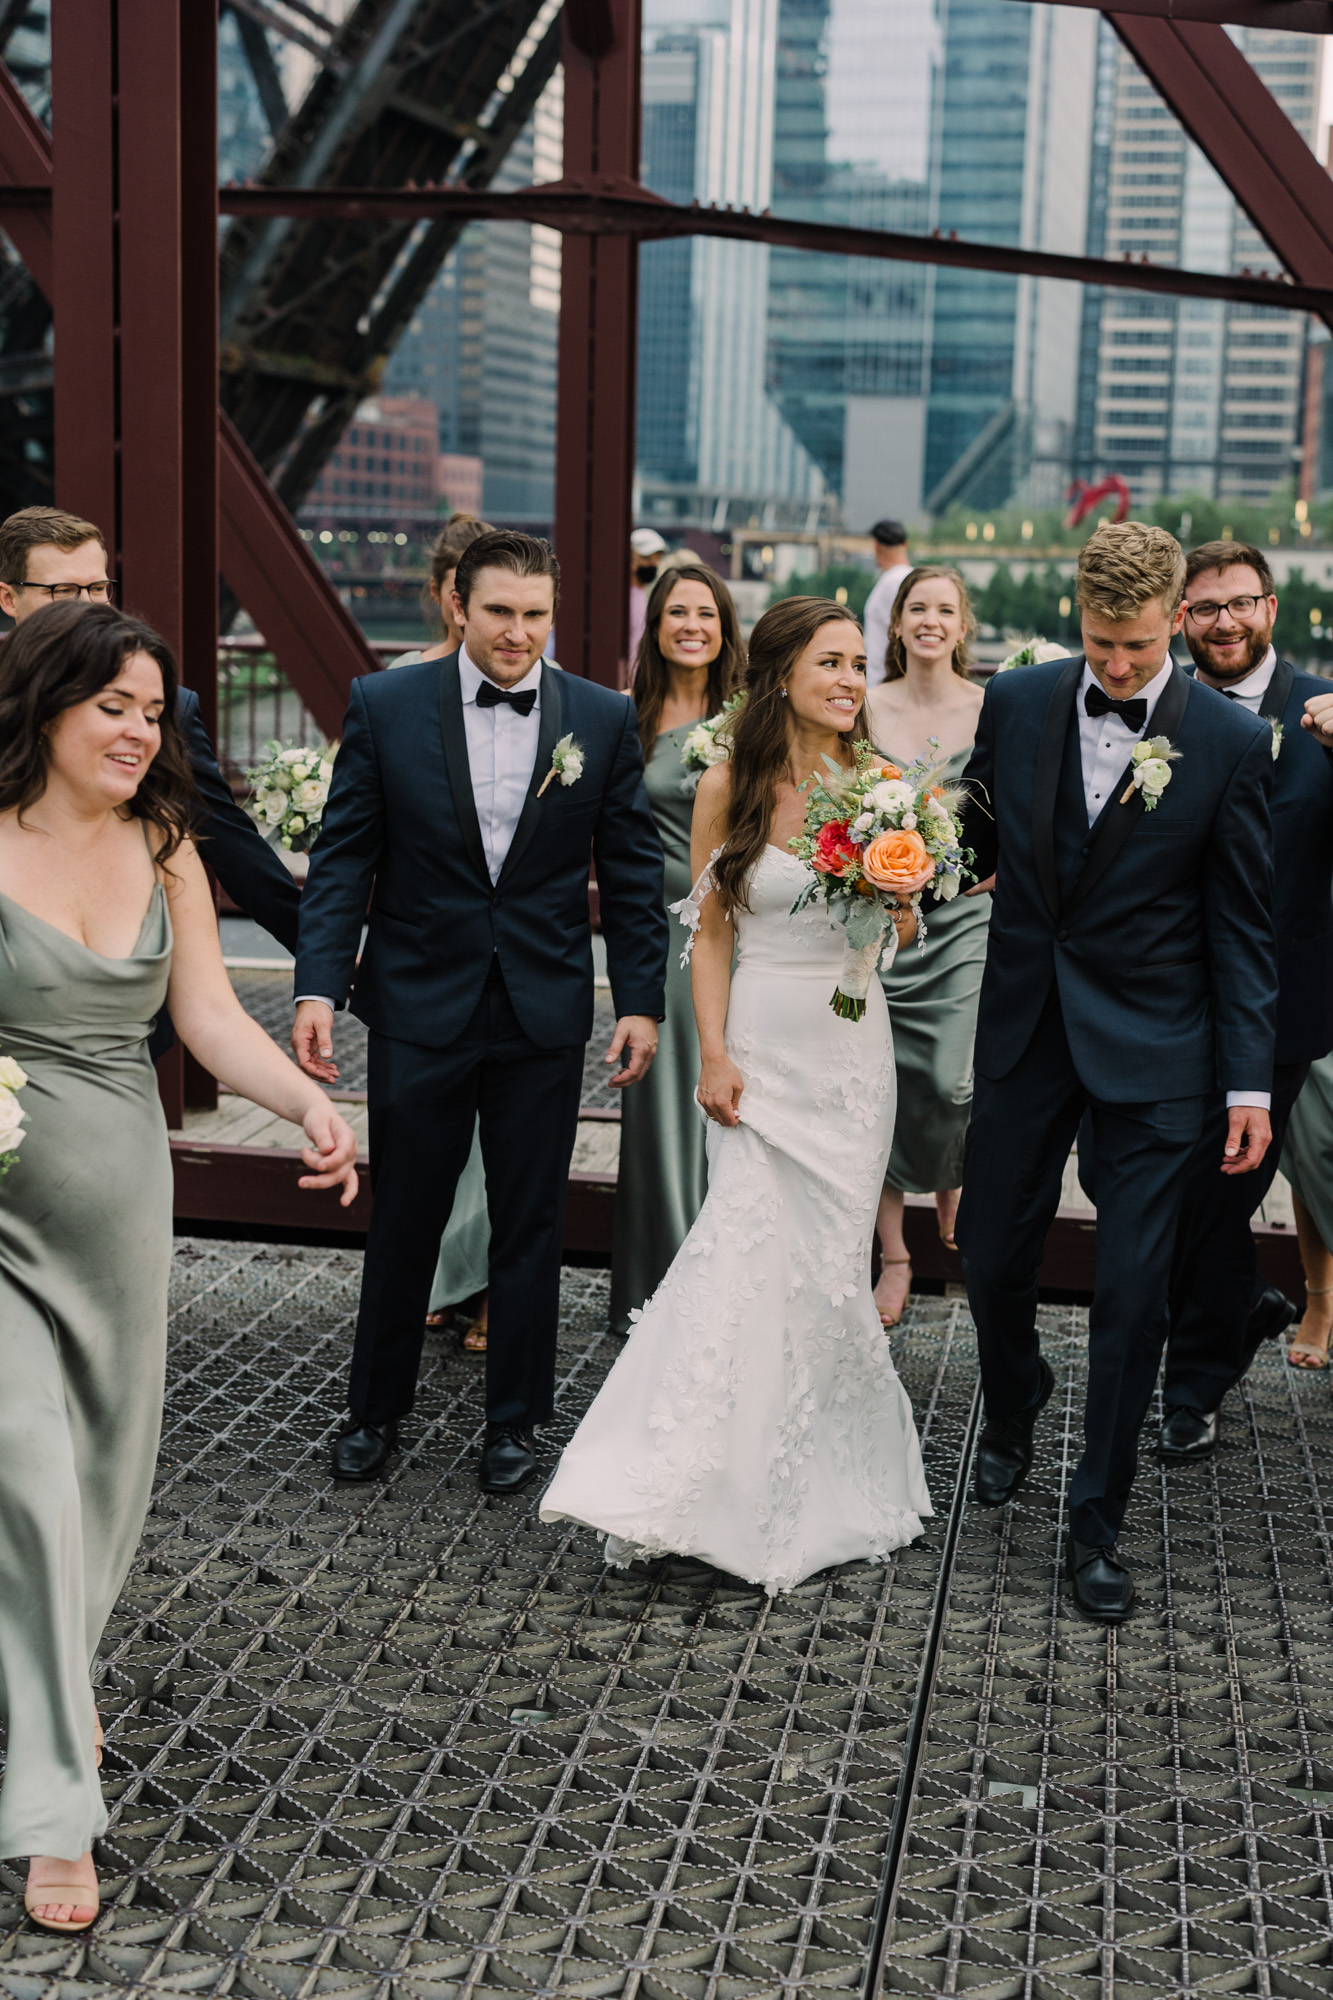 Wedding party pose on the Kinzie Street Bridge in Chicago's West Loop for a portrait.